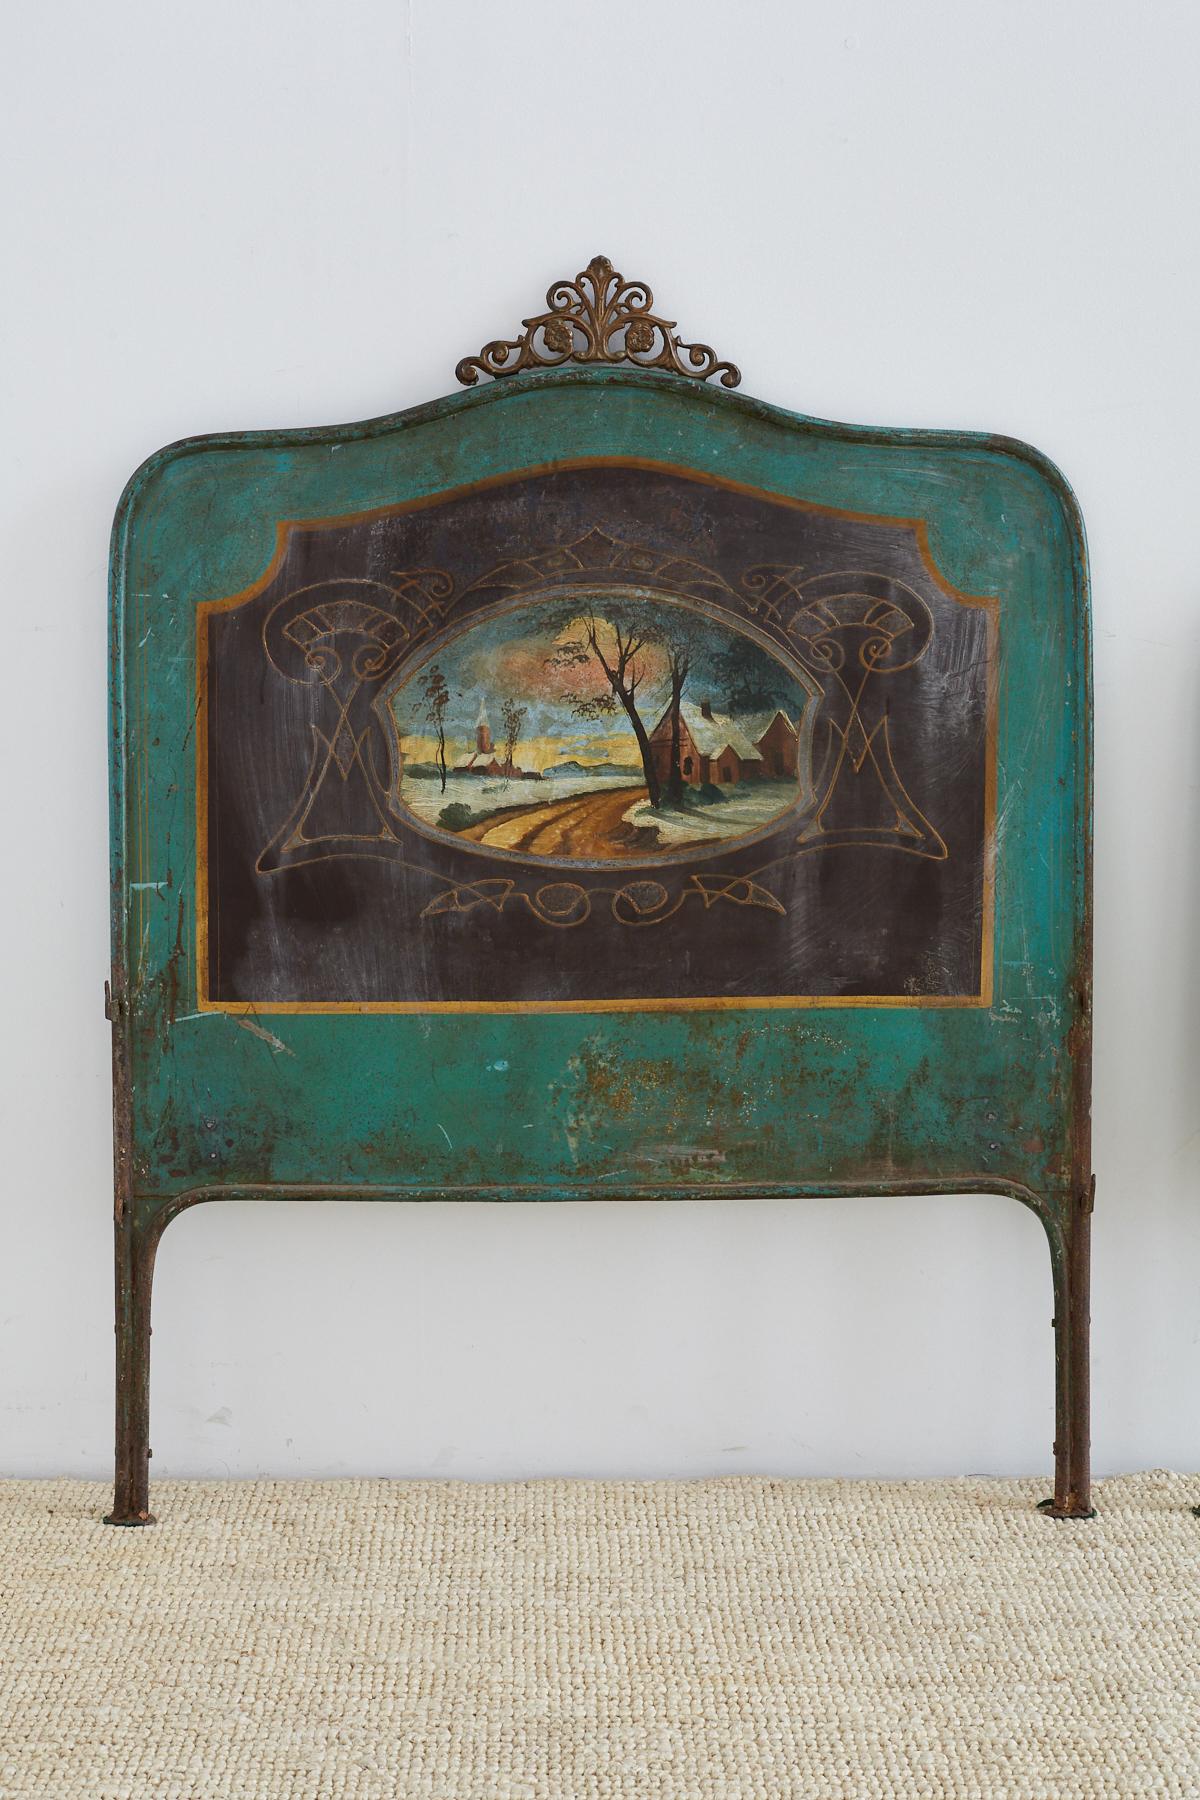 Charming 19th century Italian tole headboard and footboard featuring idyllic landscape scenes over a Robin's egg background. Each board has a filigree scrolled crown on the crest. Well patinated finish with no side rails or hardware. Original